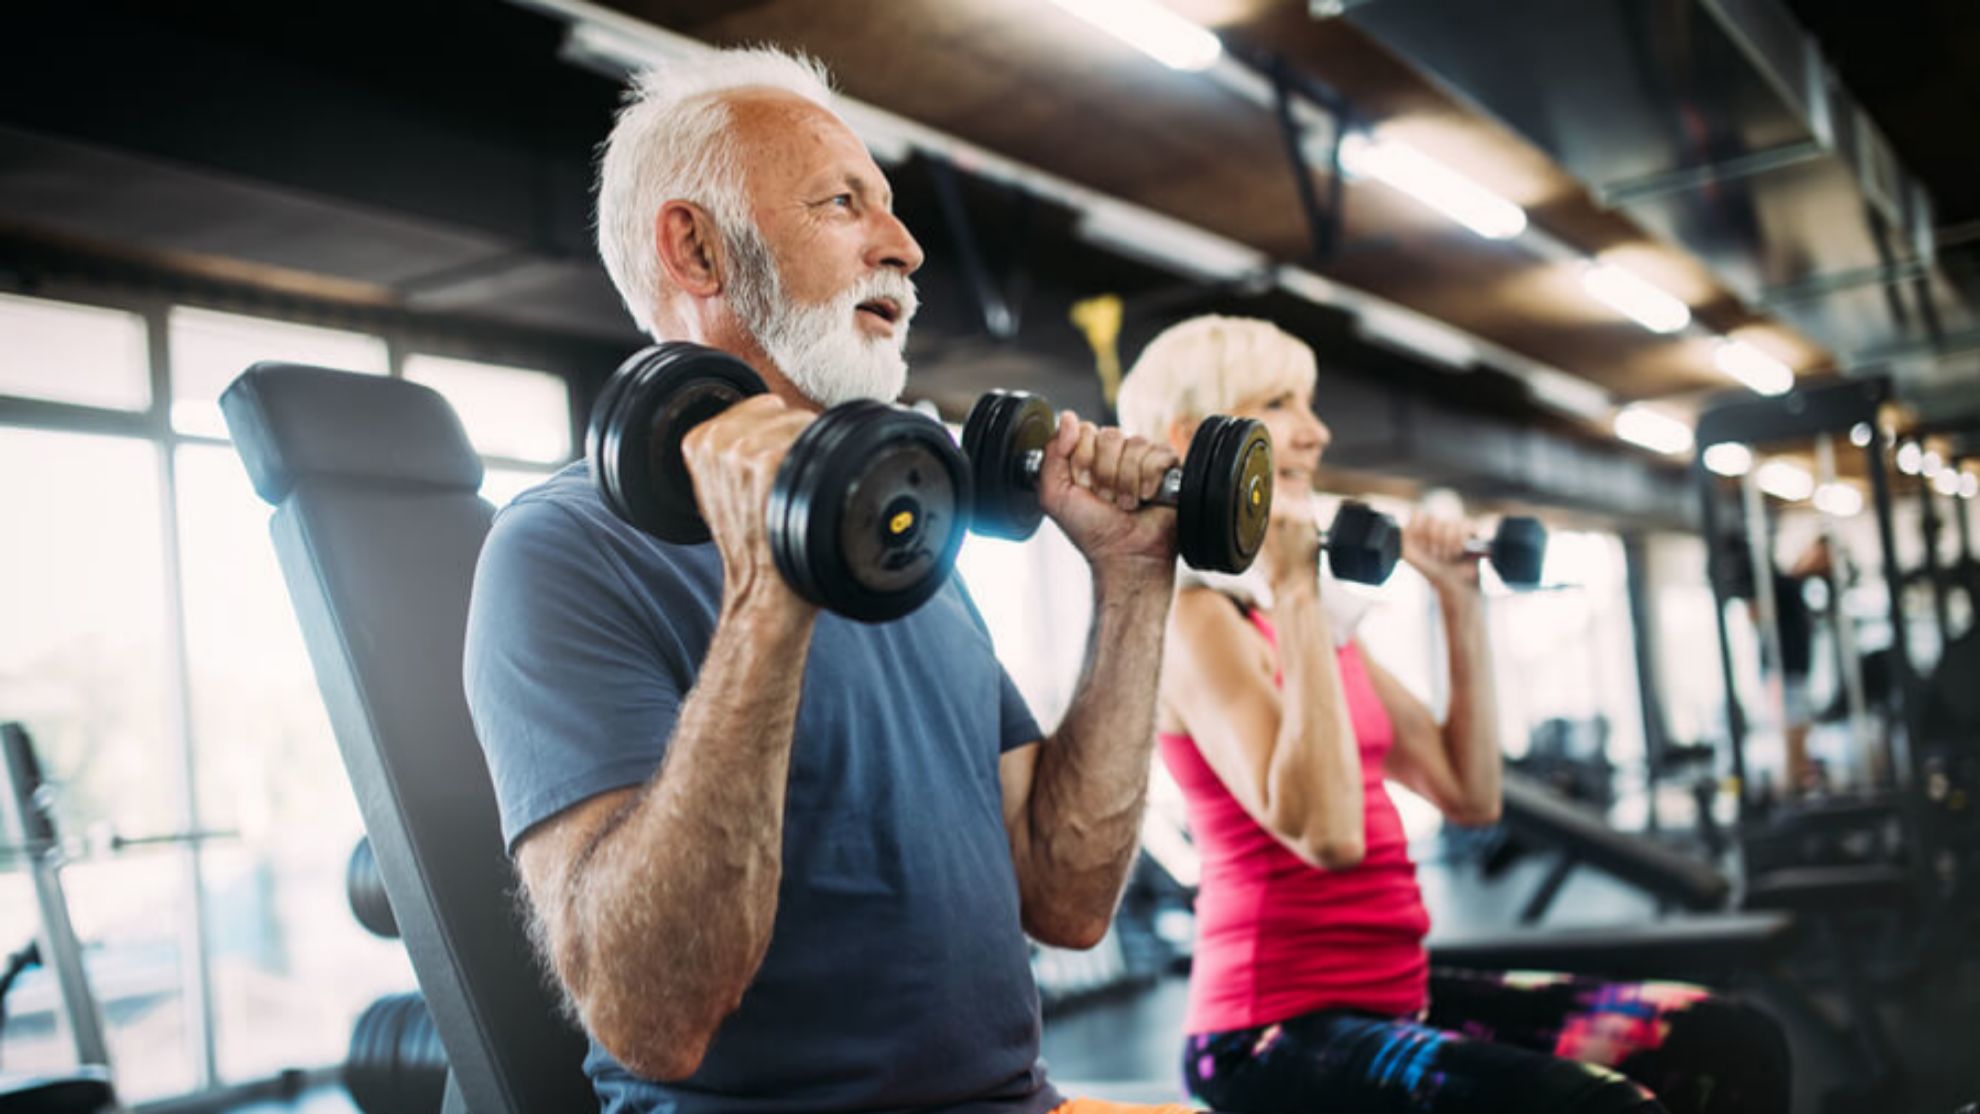 Does medicare offer a discount for fitness centers availity check contaception coverage